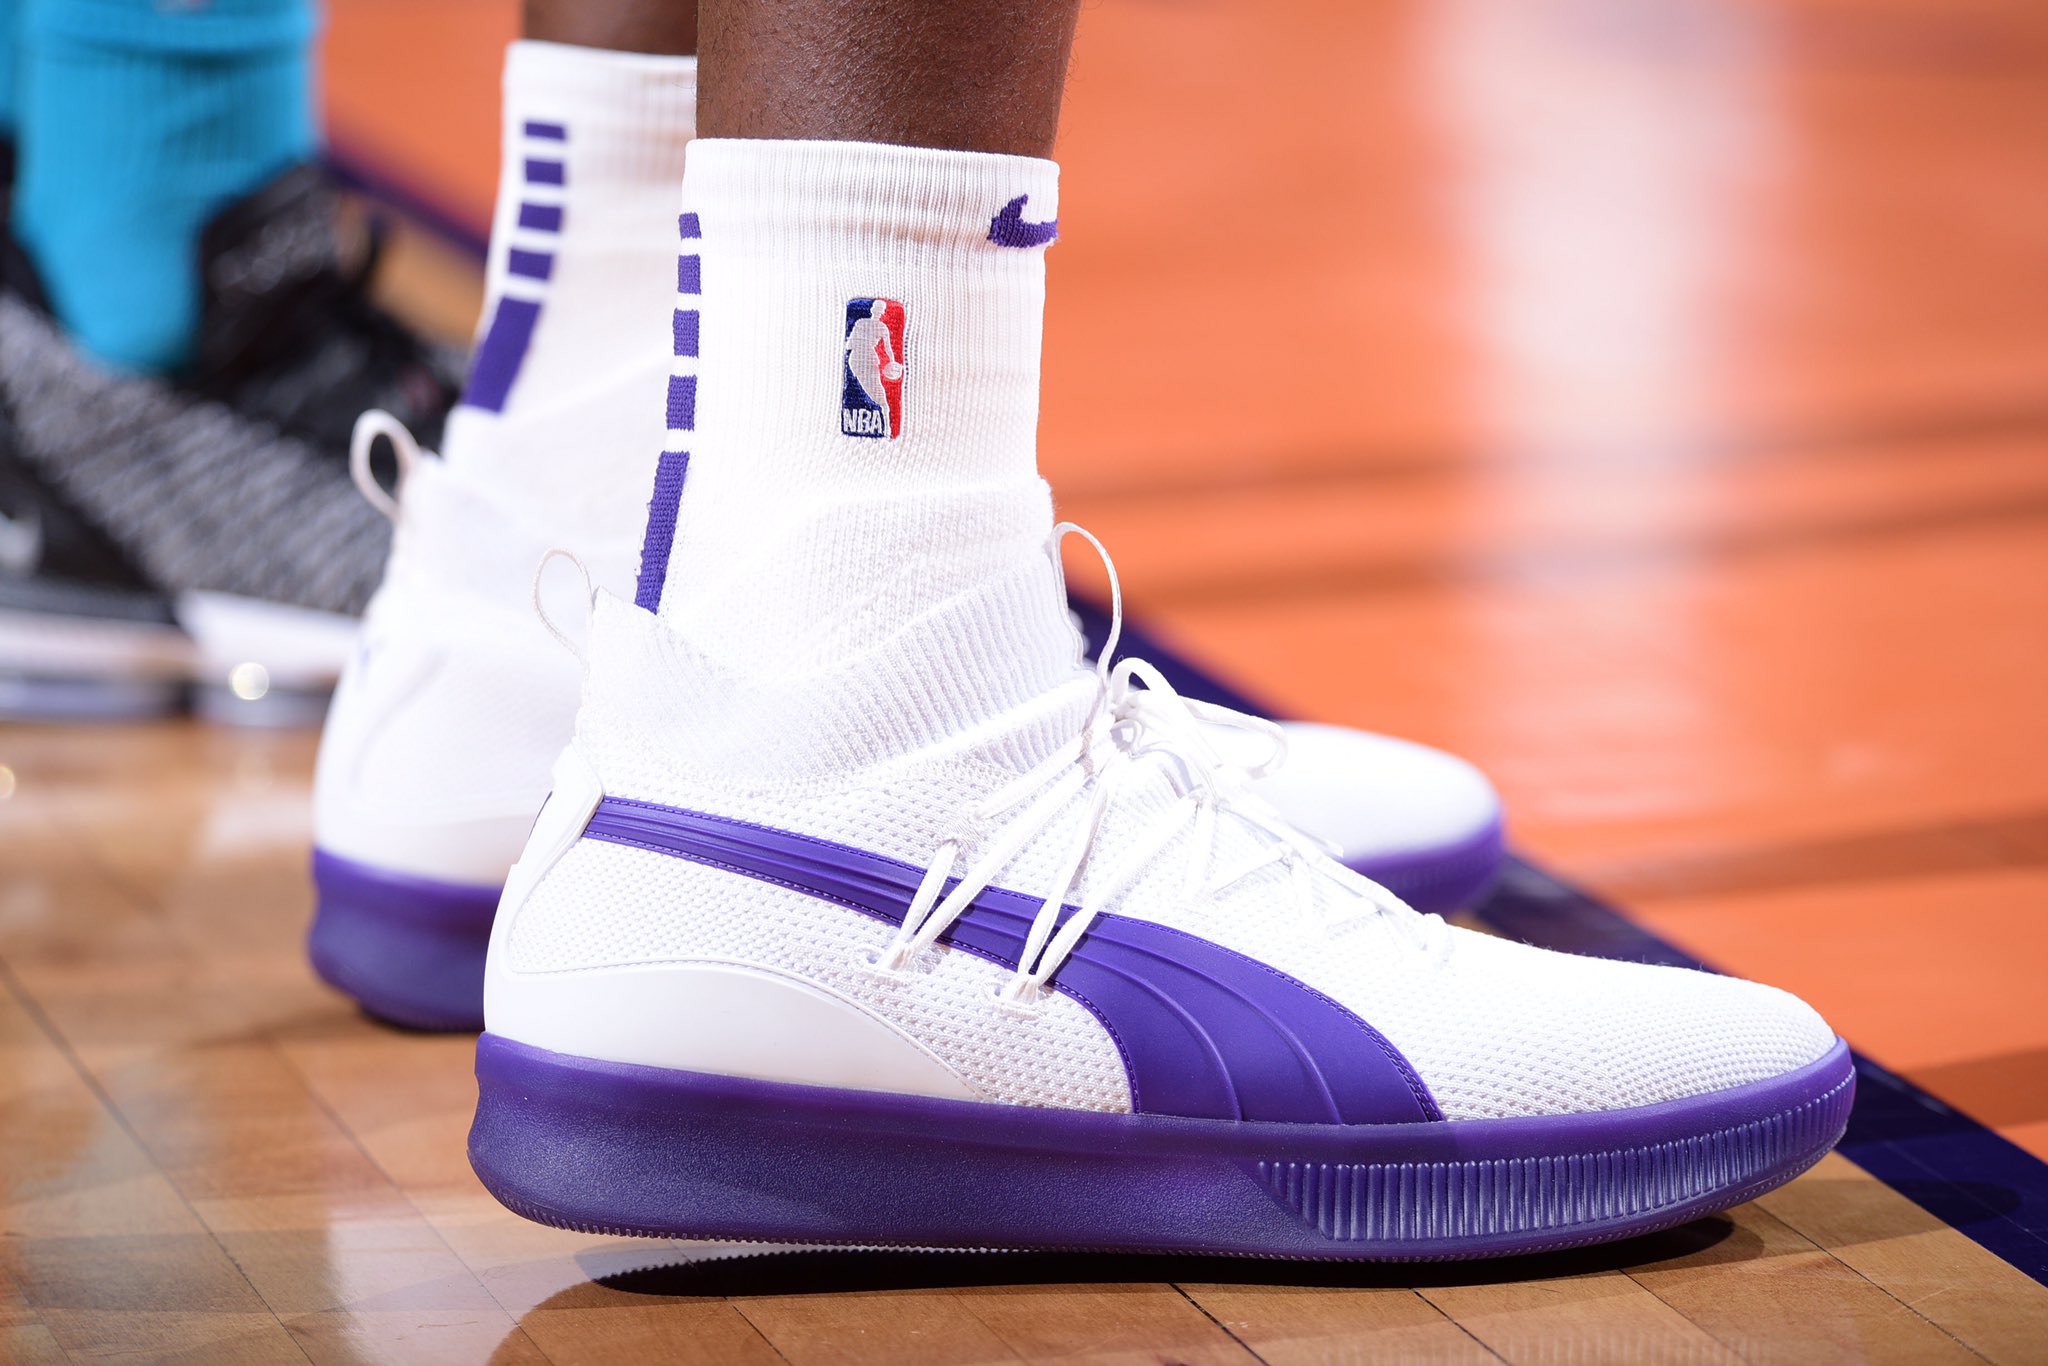 nacido Infrarrojo pestillo B/R Kicks on Twitter: ".@DeandreAyton with the Puma Clyde Court Disrupt  with the purple sole 💧 https://t.co/iq1yEbG34O" / Twitter